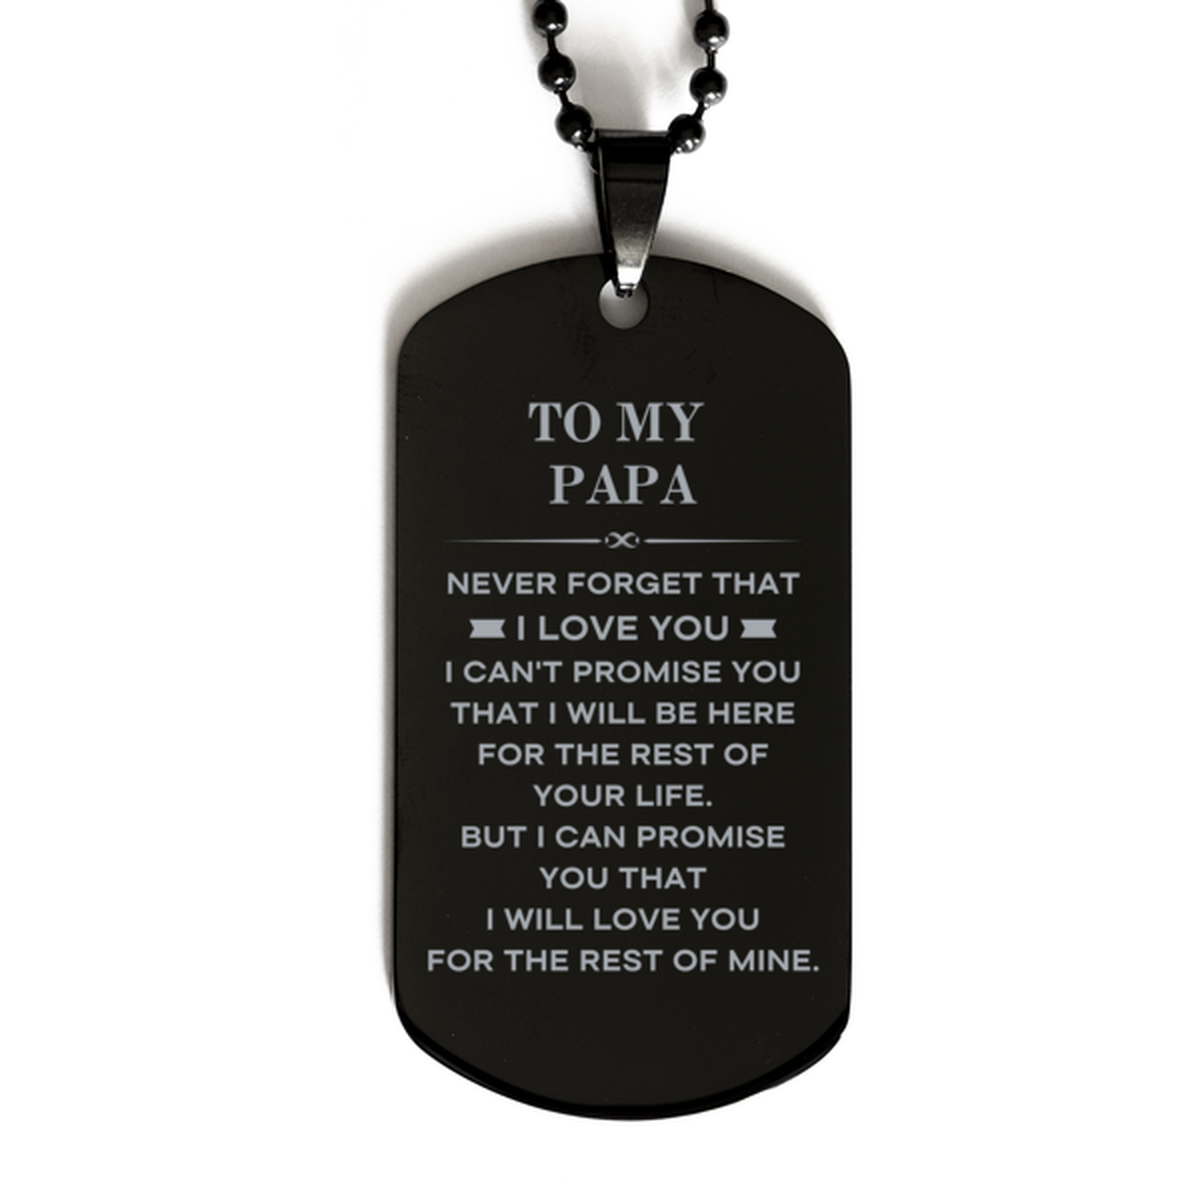 To My Papa Gifts, I will love you for the rest of mine, Love Papa Dog Tag Necklace, Birthday Christmas Unique Black Dog Tag For Papa